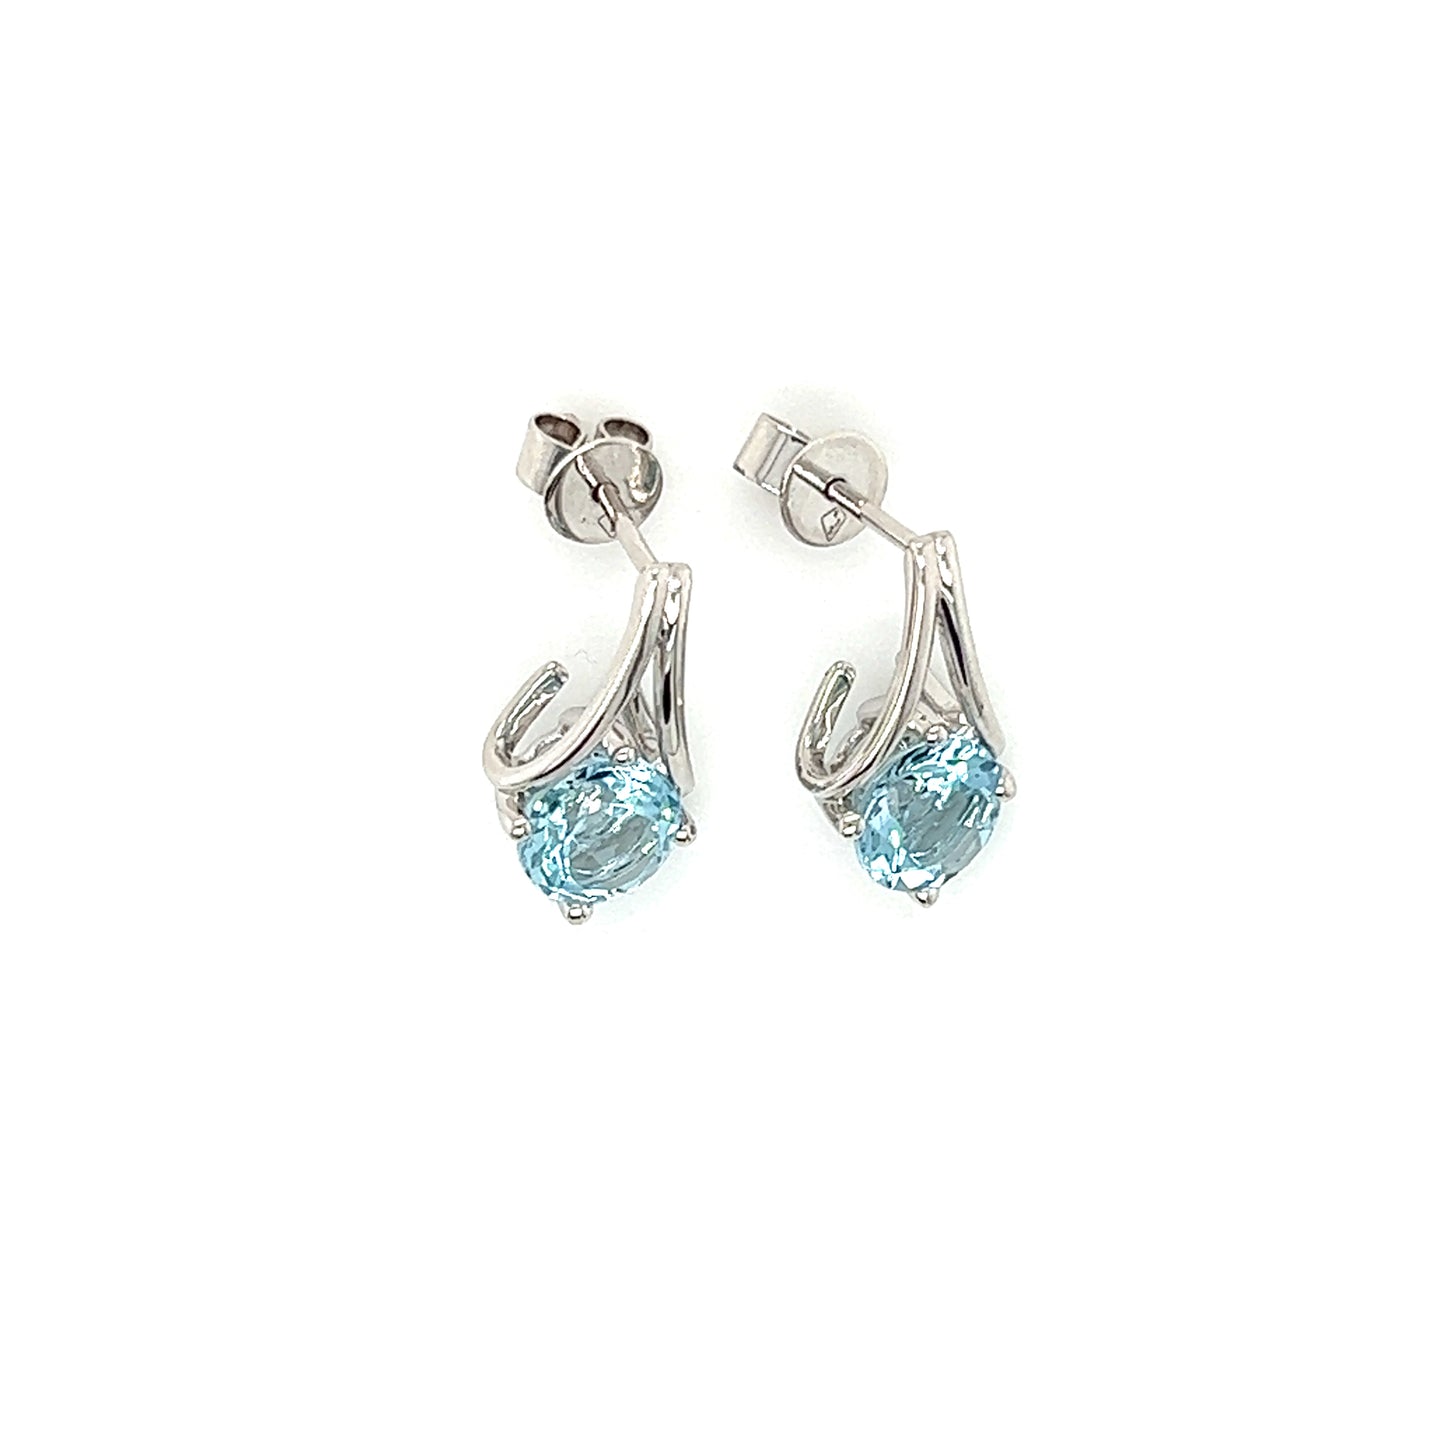 Round Aquamarine Earrings with V-Shaped Bars in 14K White Gold